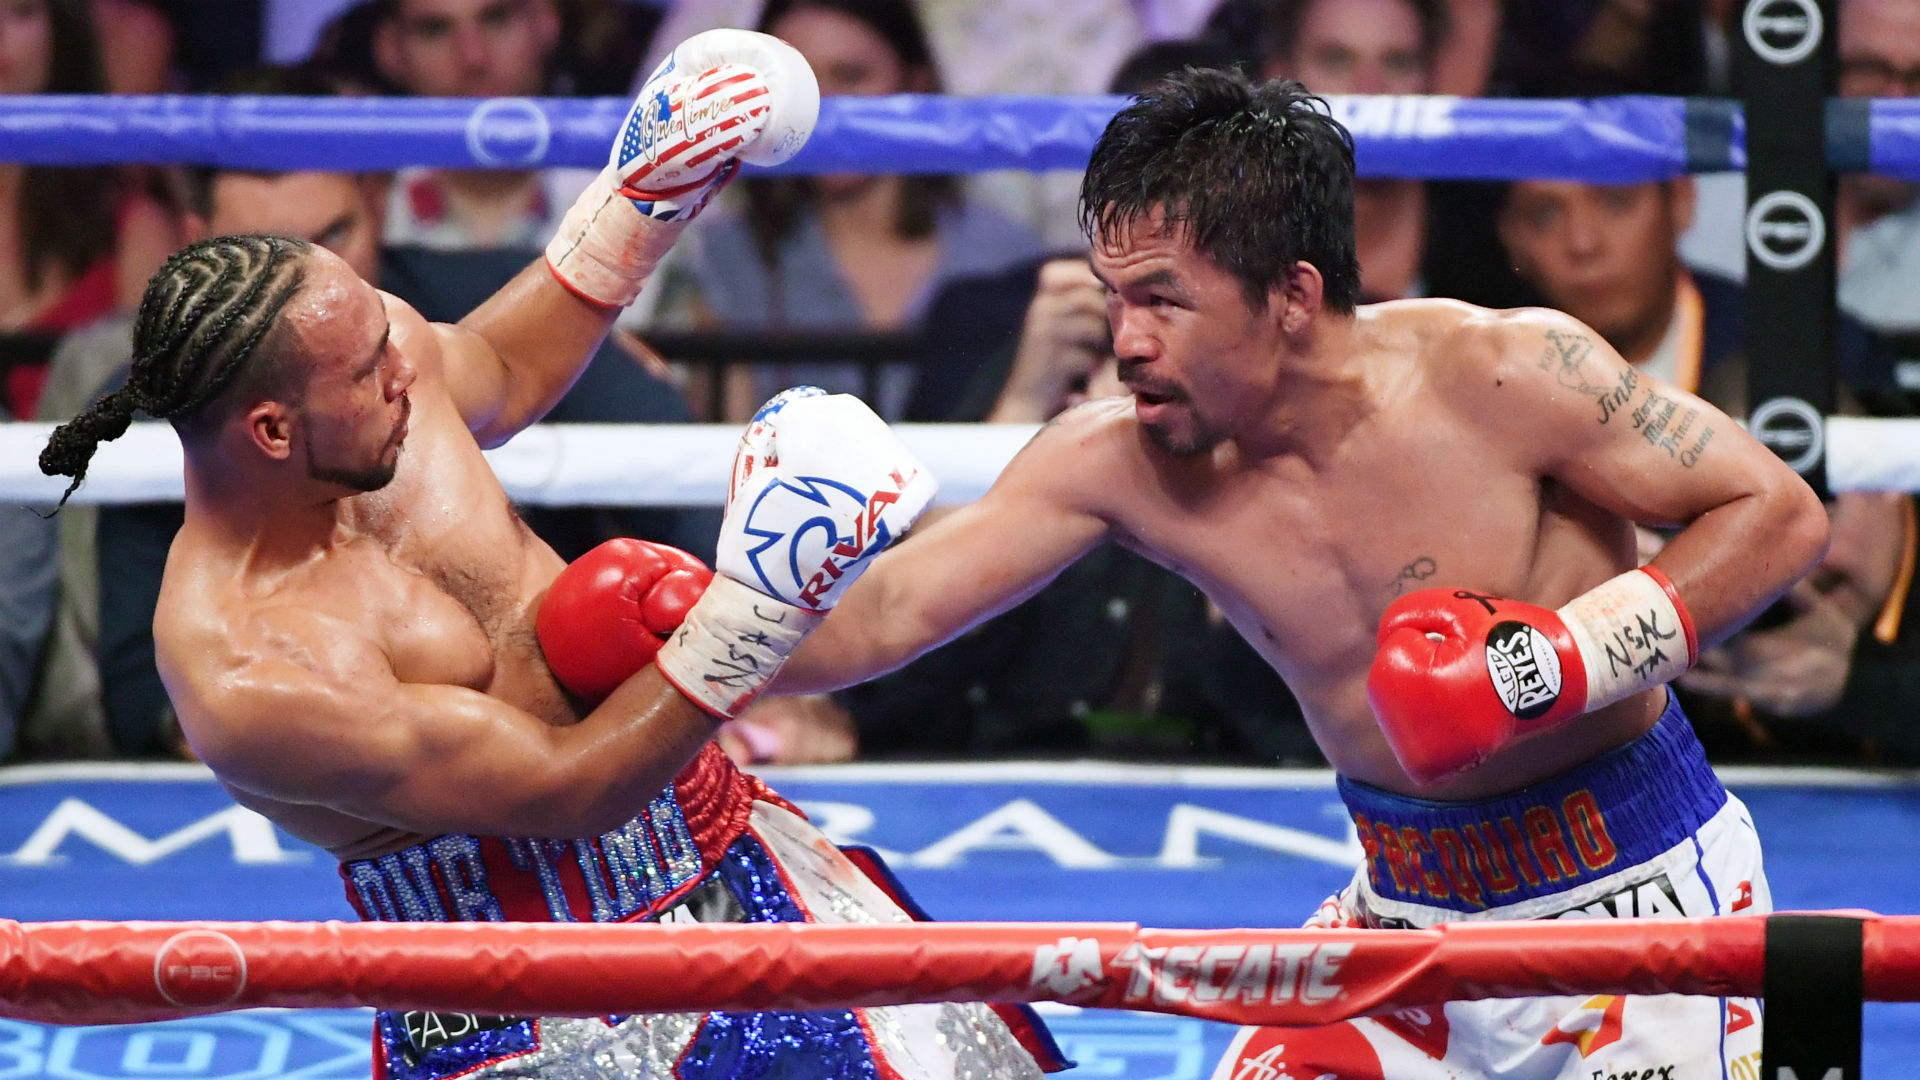 What's Next for Pacquiao after Pacquiao vs Thurman